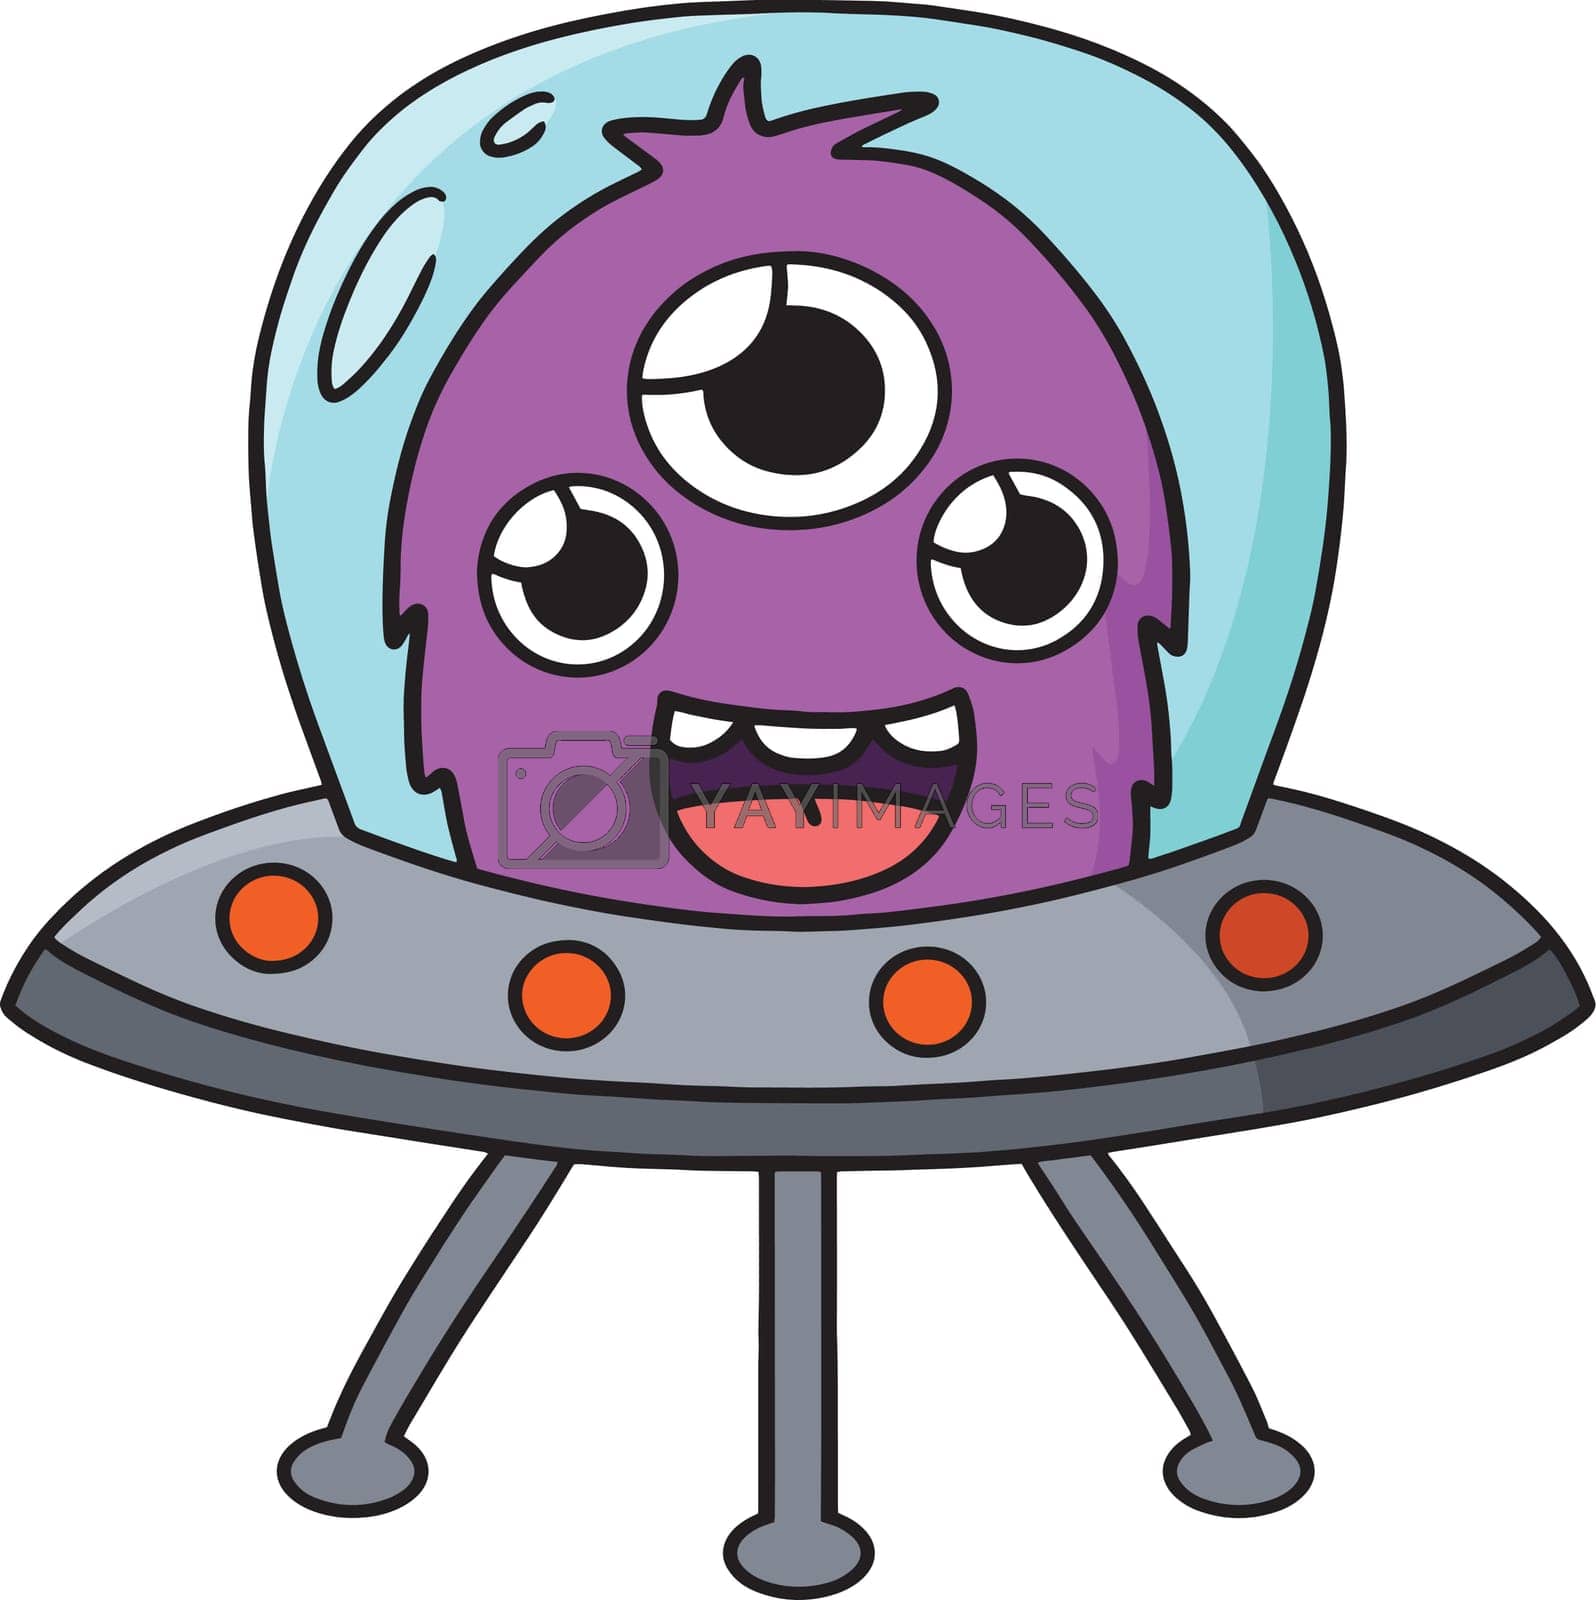 Royalty free image of UFO Alien Space Cartoon Colored Clipart by abbydesign